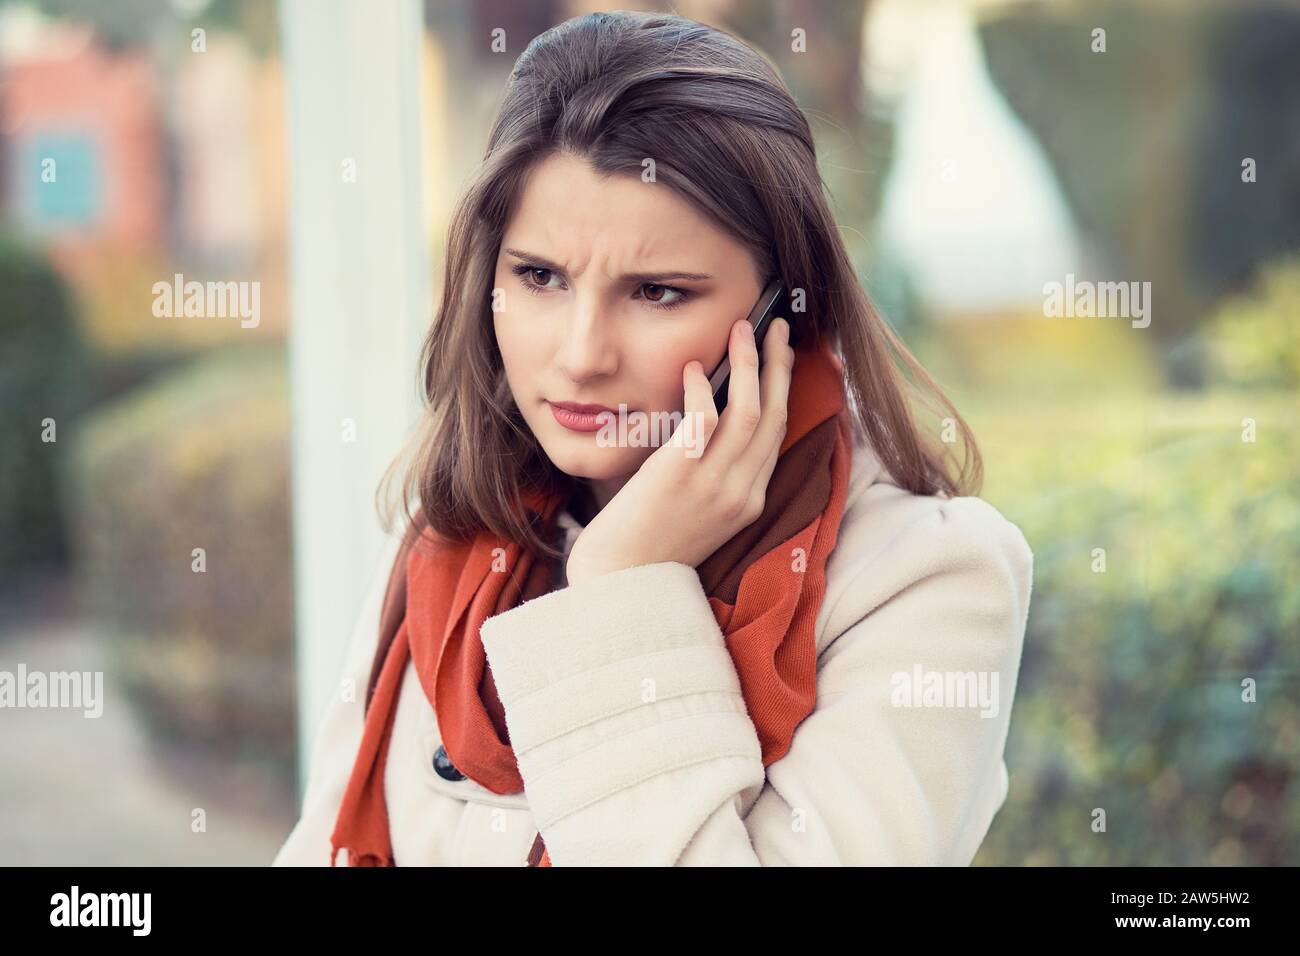 Unhappy customer. Closeup portrait headshot angry young woman talking on mobile phone looking frustrated serious girl student cityscape outdoor backgr Stock Photo